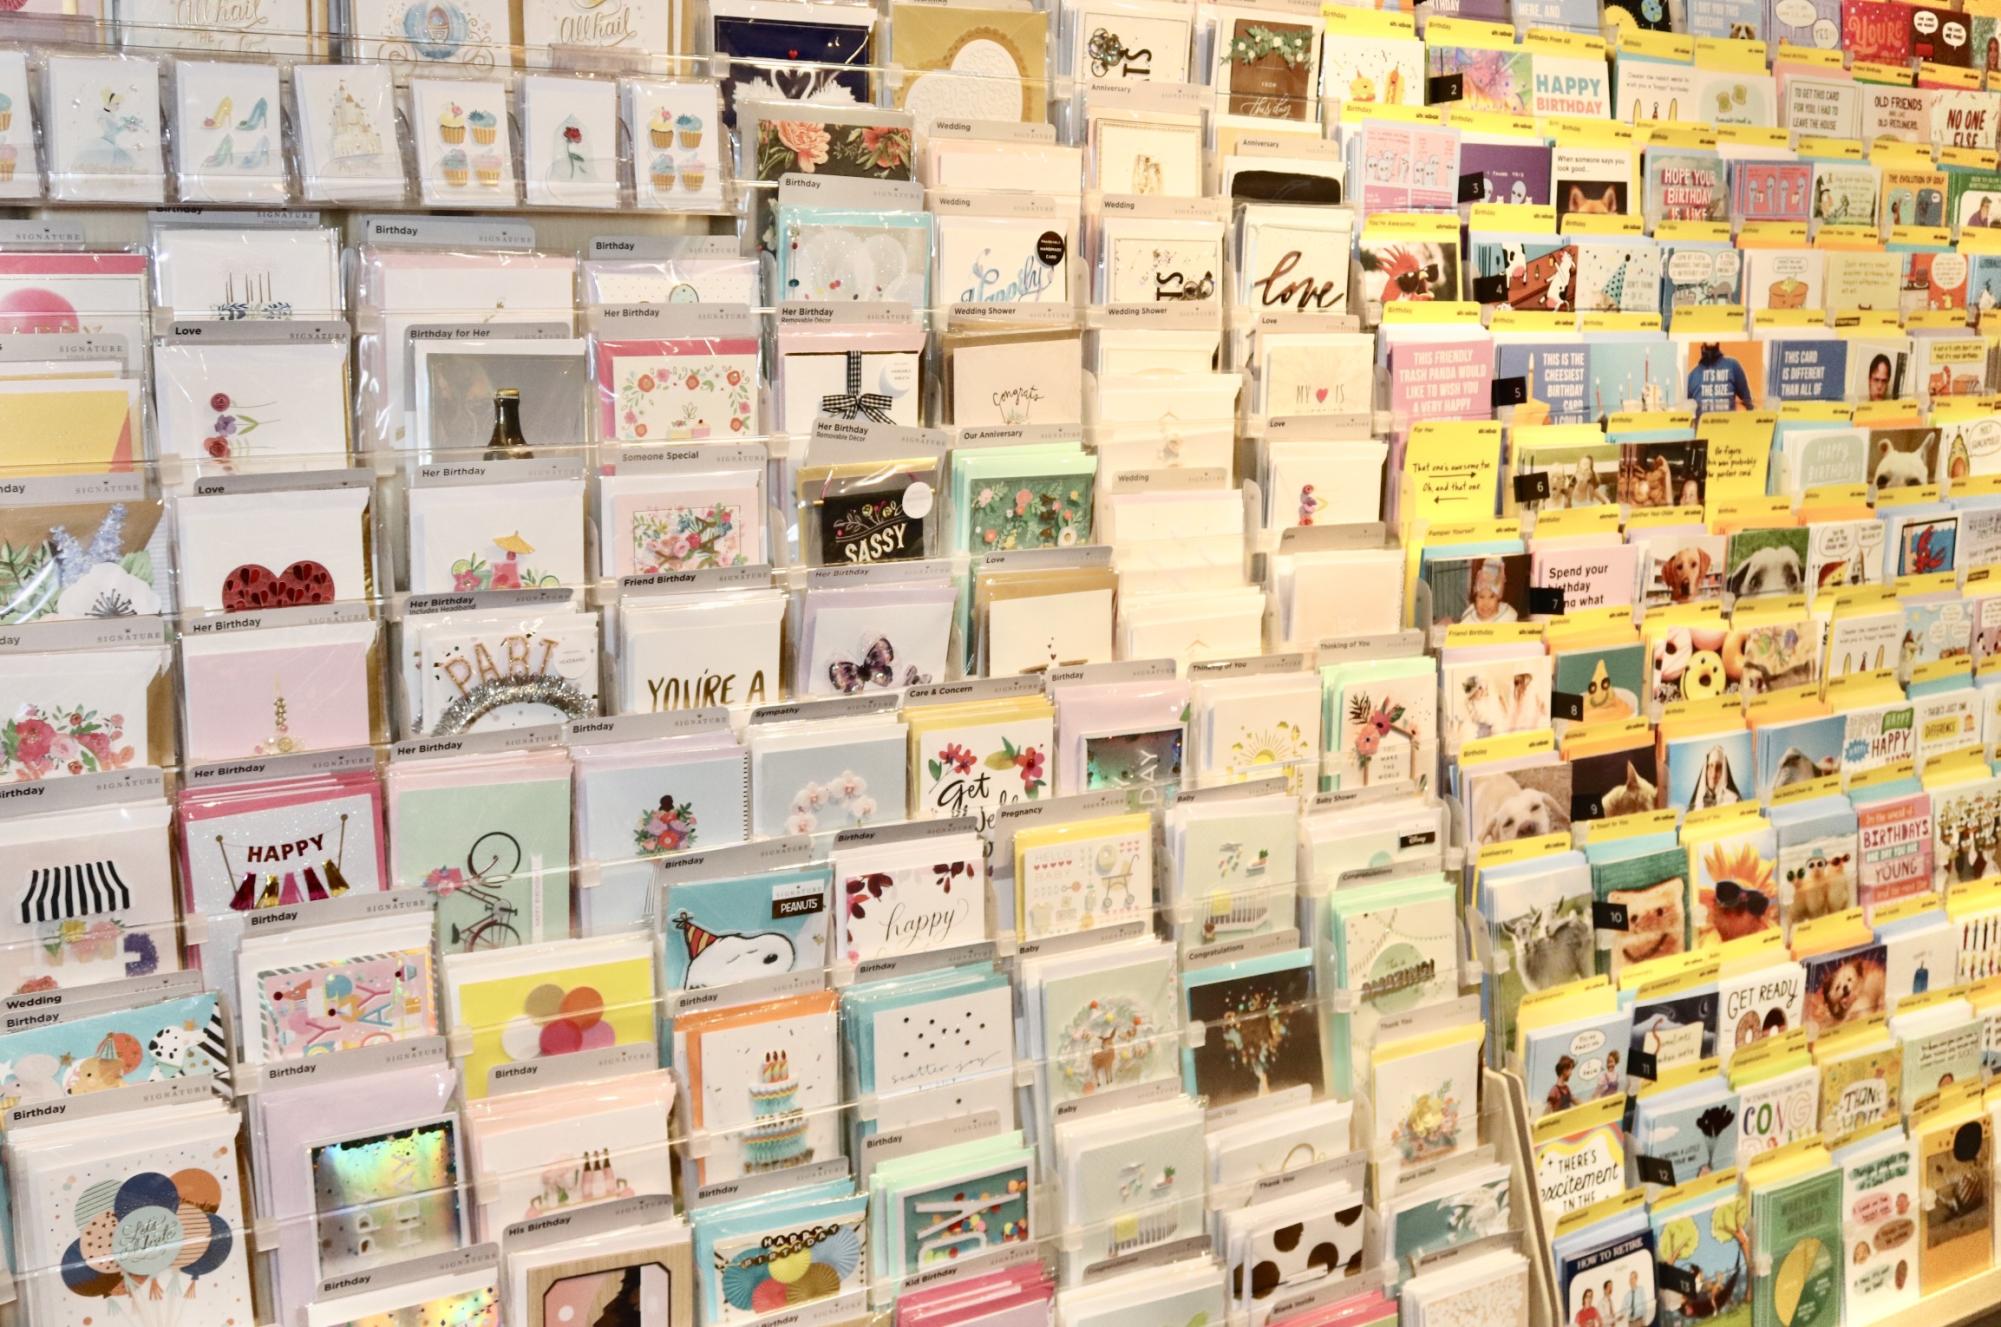 A wall of Hallmark cards lines the wall of the gift shop at the end of the visit. Hallmark sells approximately 6.5 billion greeting cards every year. 